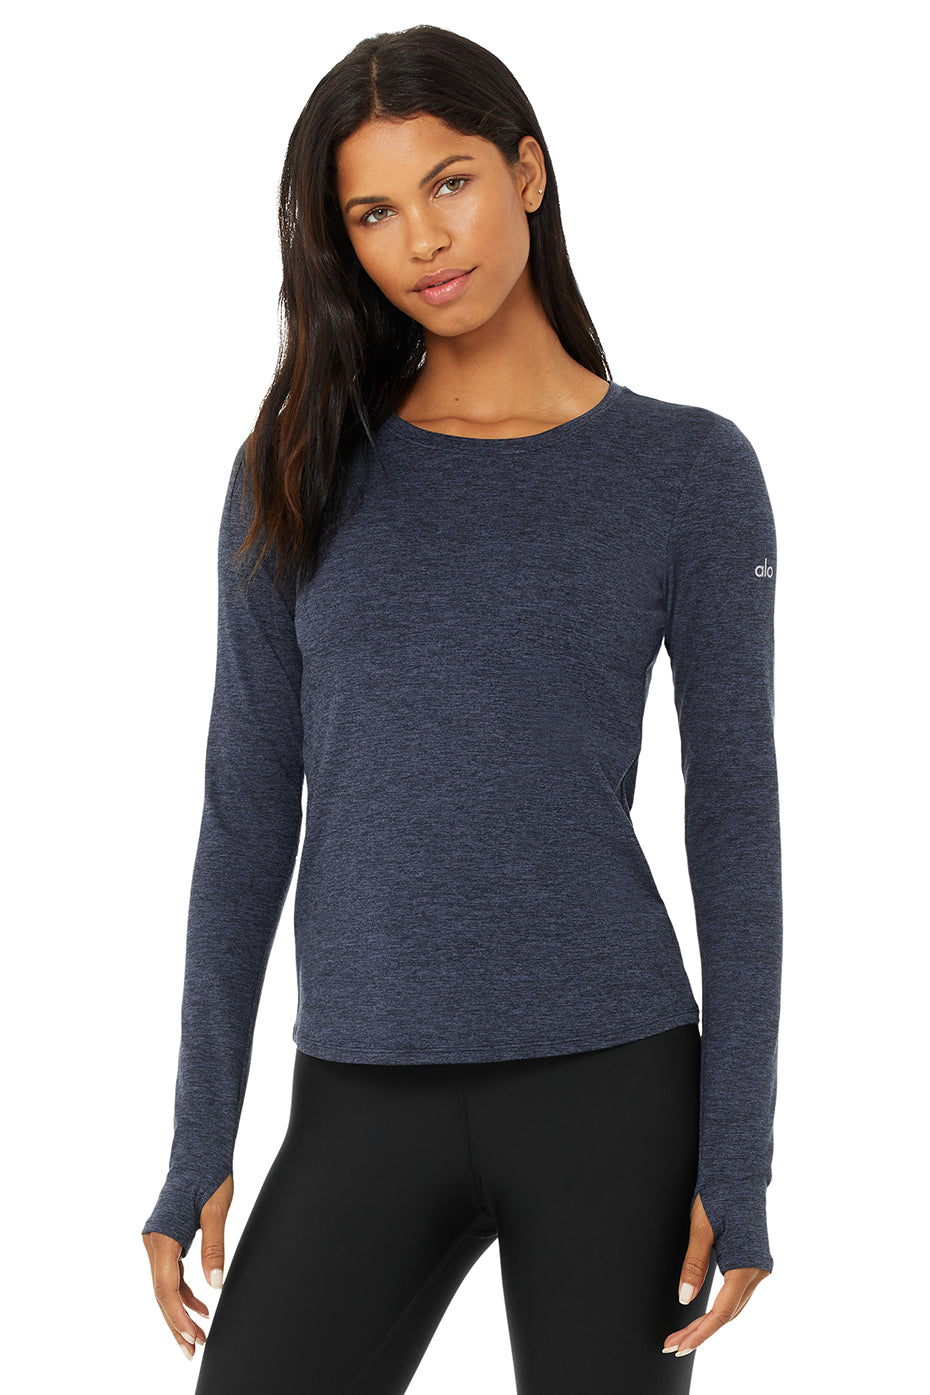 Alosoft Finesse Long Sleeve Top in Rich Navy Heather by Alo Yoga - Work  Well Daily